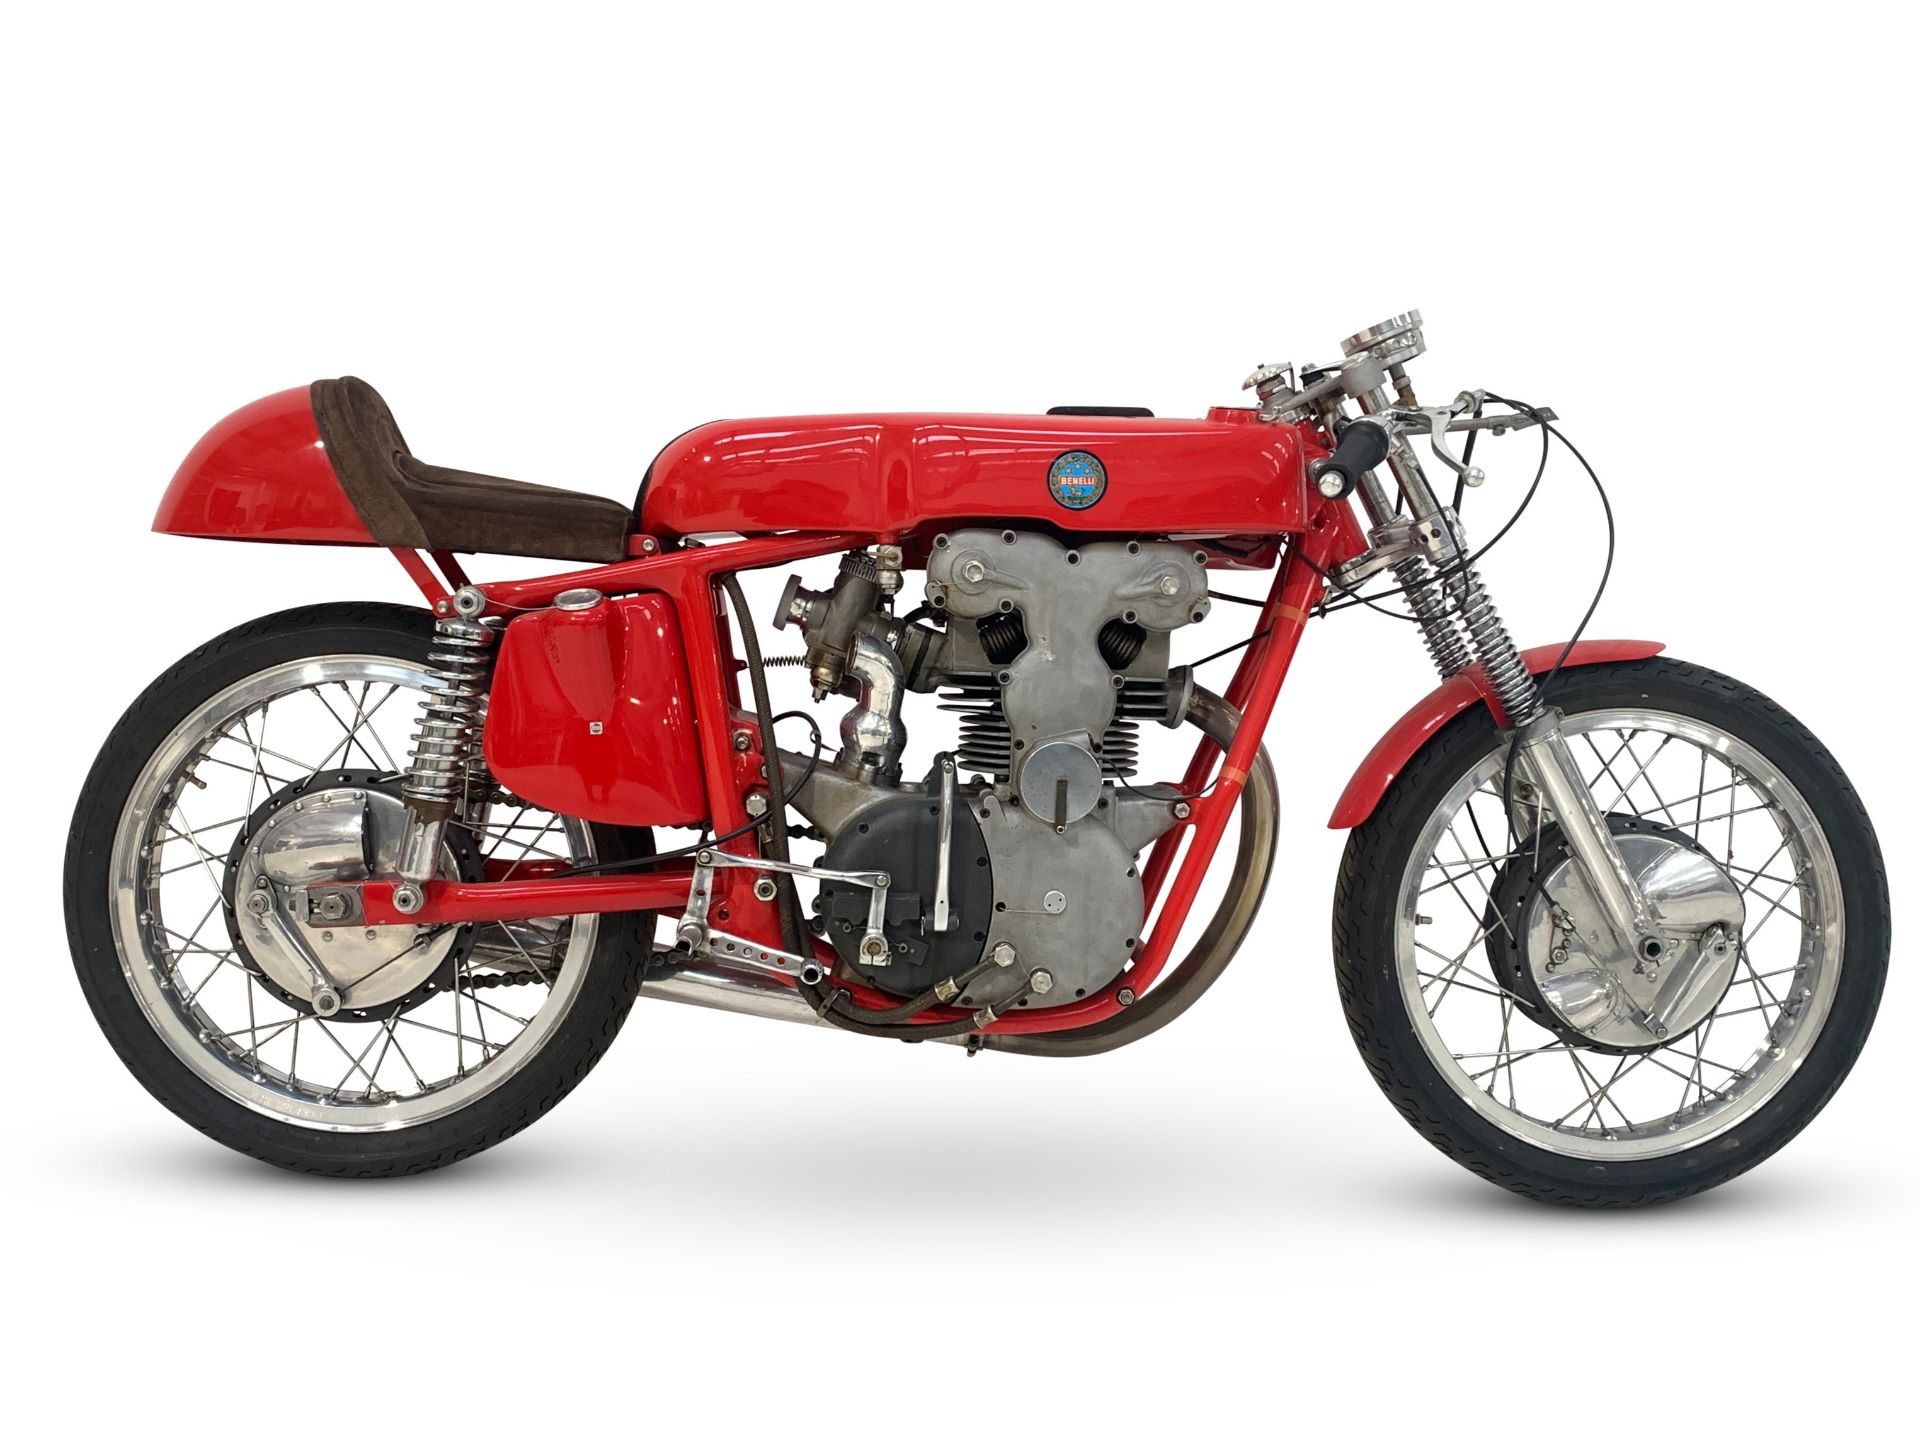 1959 Benelli 248cc Grand Prix Racing Motorcycle Frame no. 1003GPX Engine no. 1003GPX